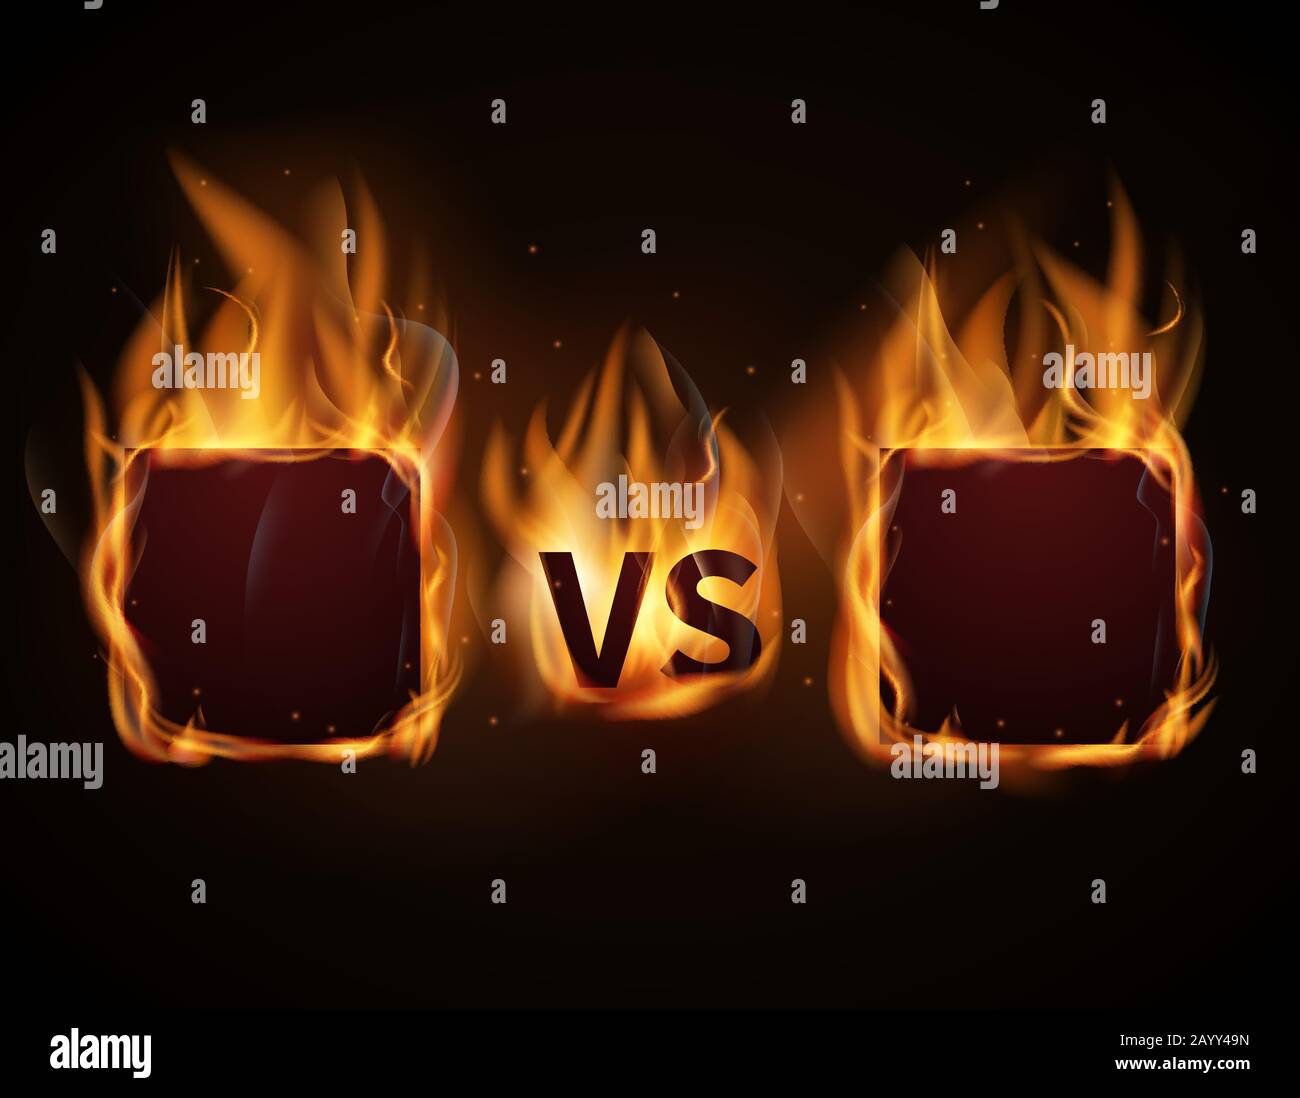 Versus Screen With Fire Frames And Vs Letters Flaming Vs Screen For Duel And Confrontation Vector Illustration Stock Vector Image Art Alamy